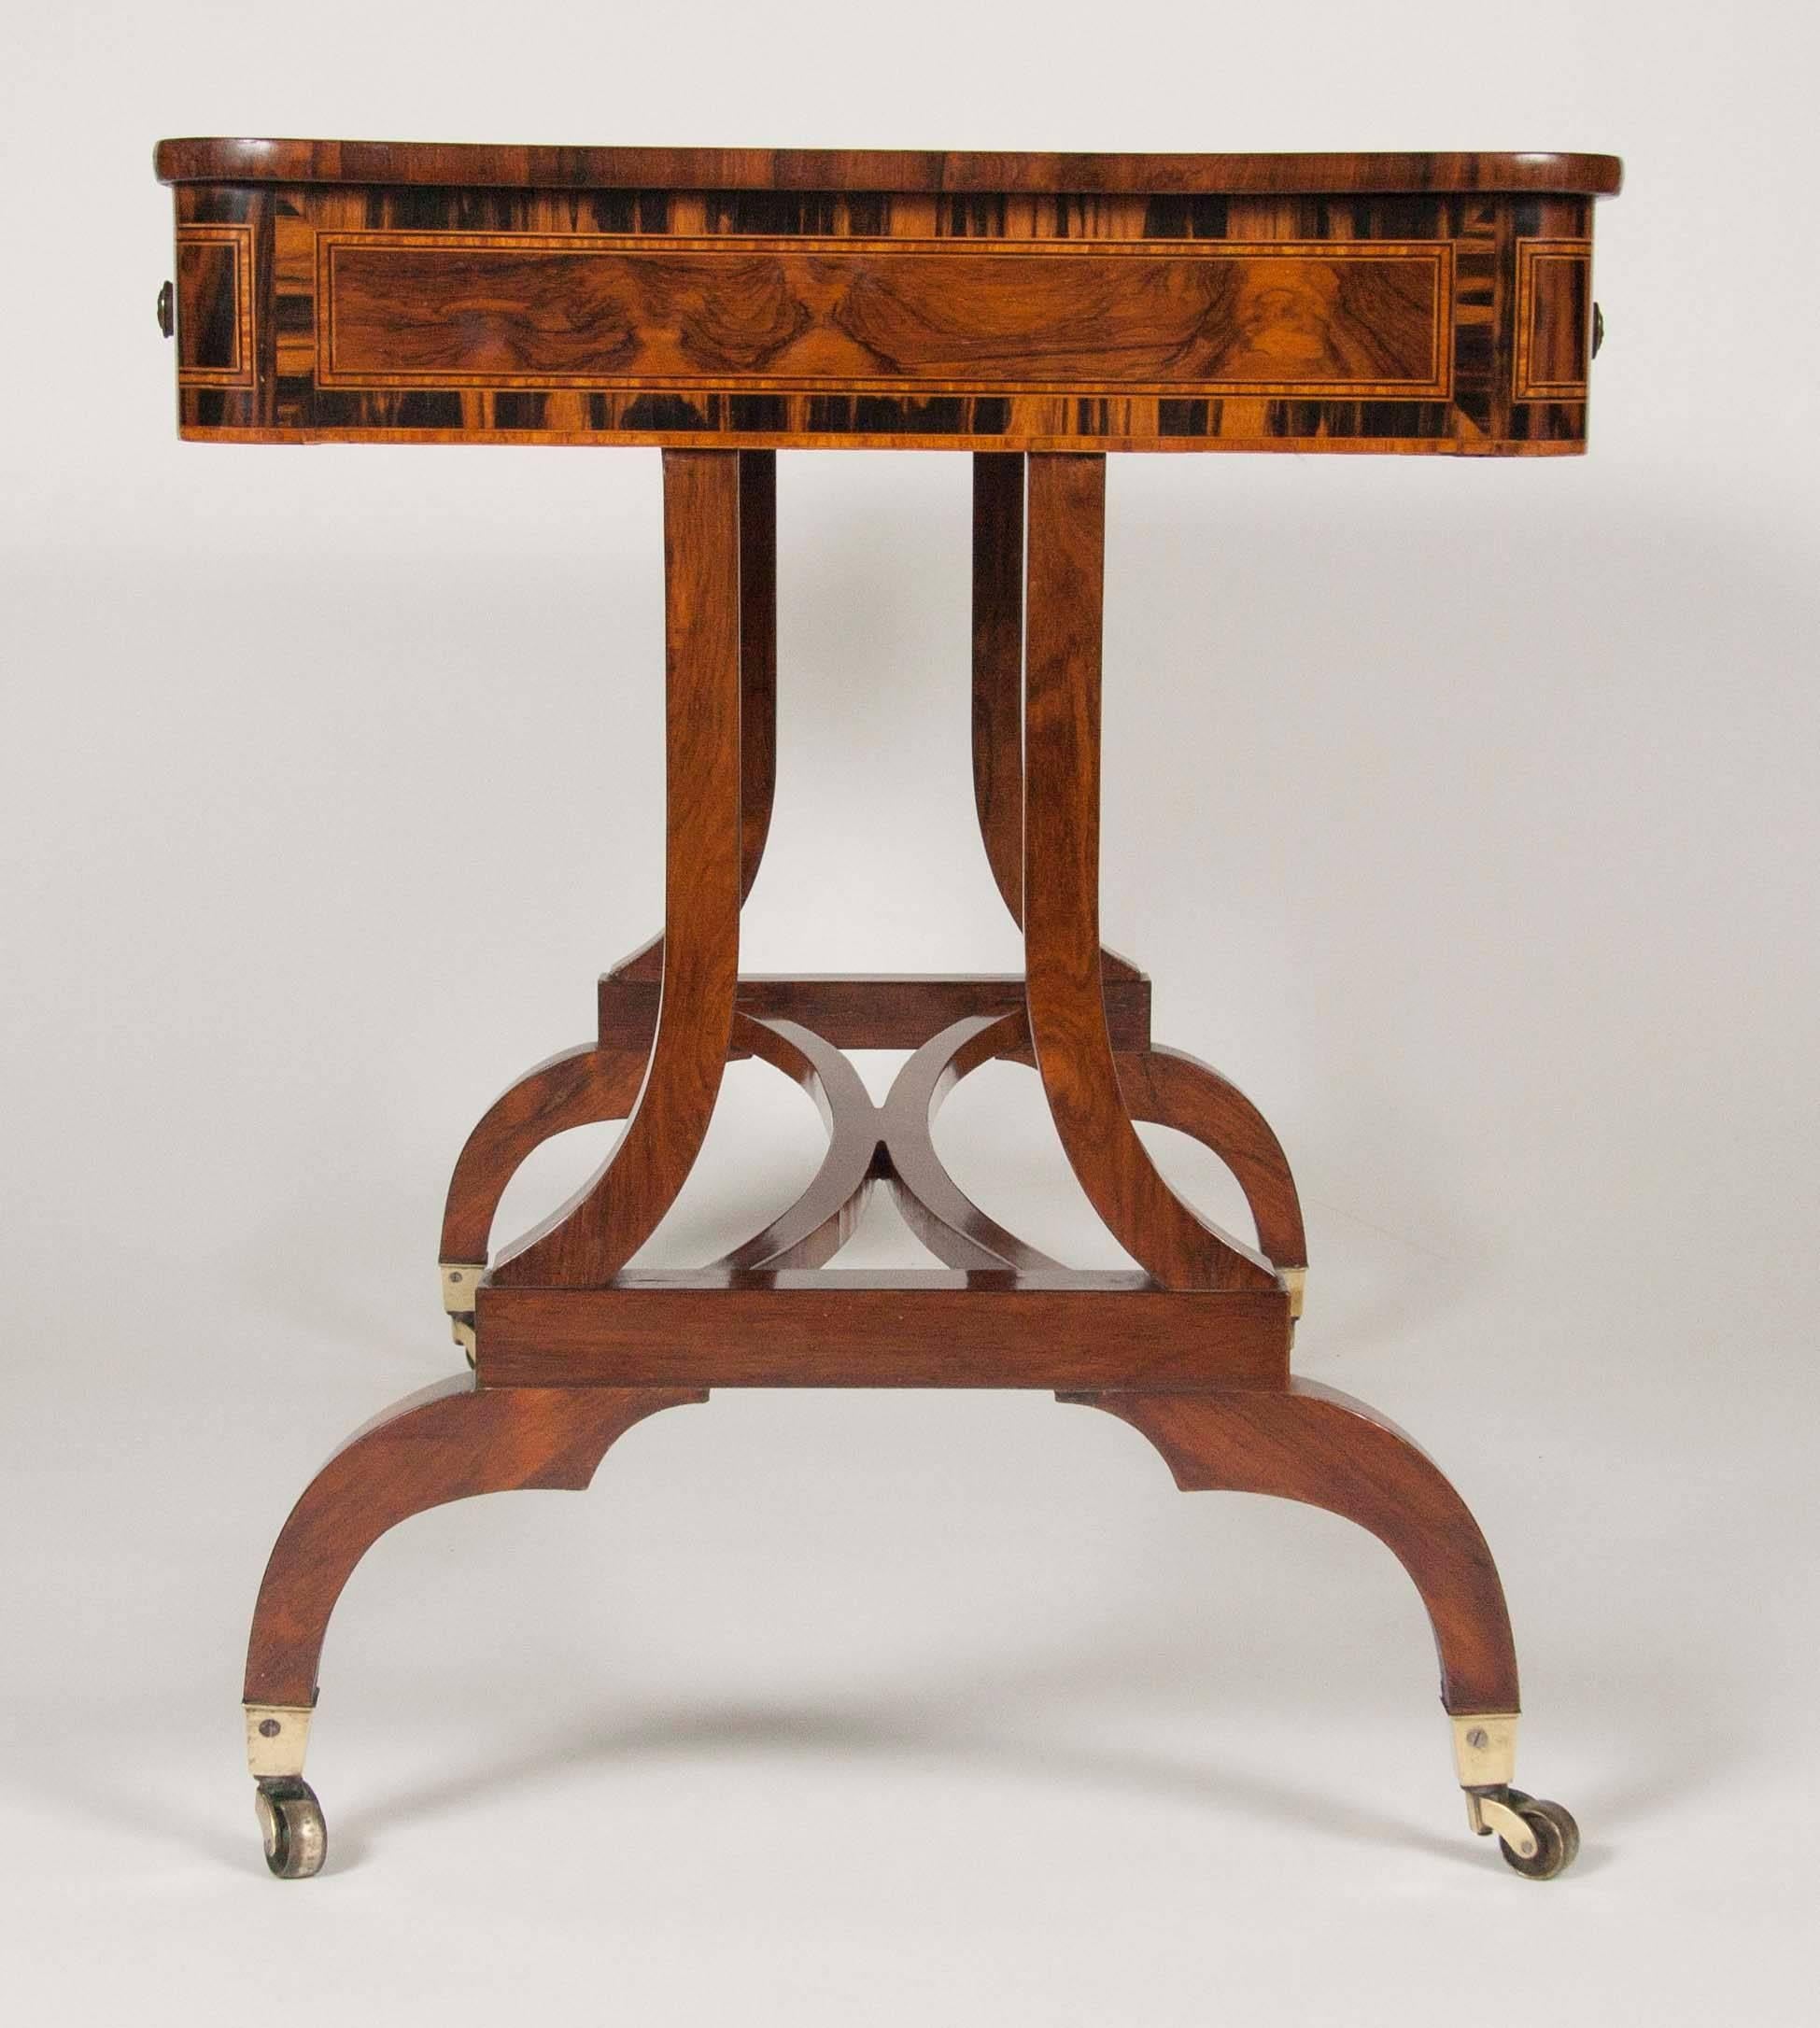 Rosewood and Calamander Regency Library Table In Good Condition For Sale In Stamford, CT